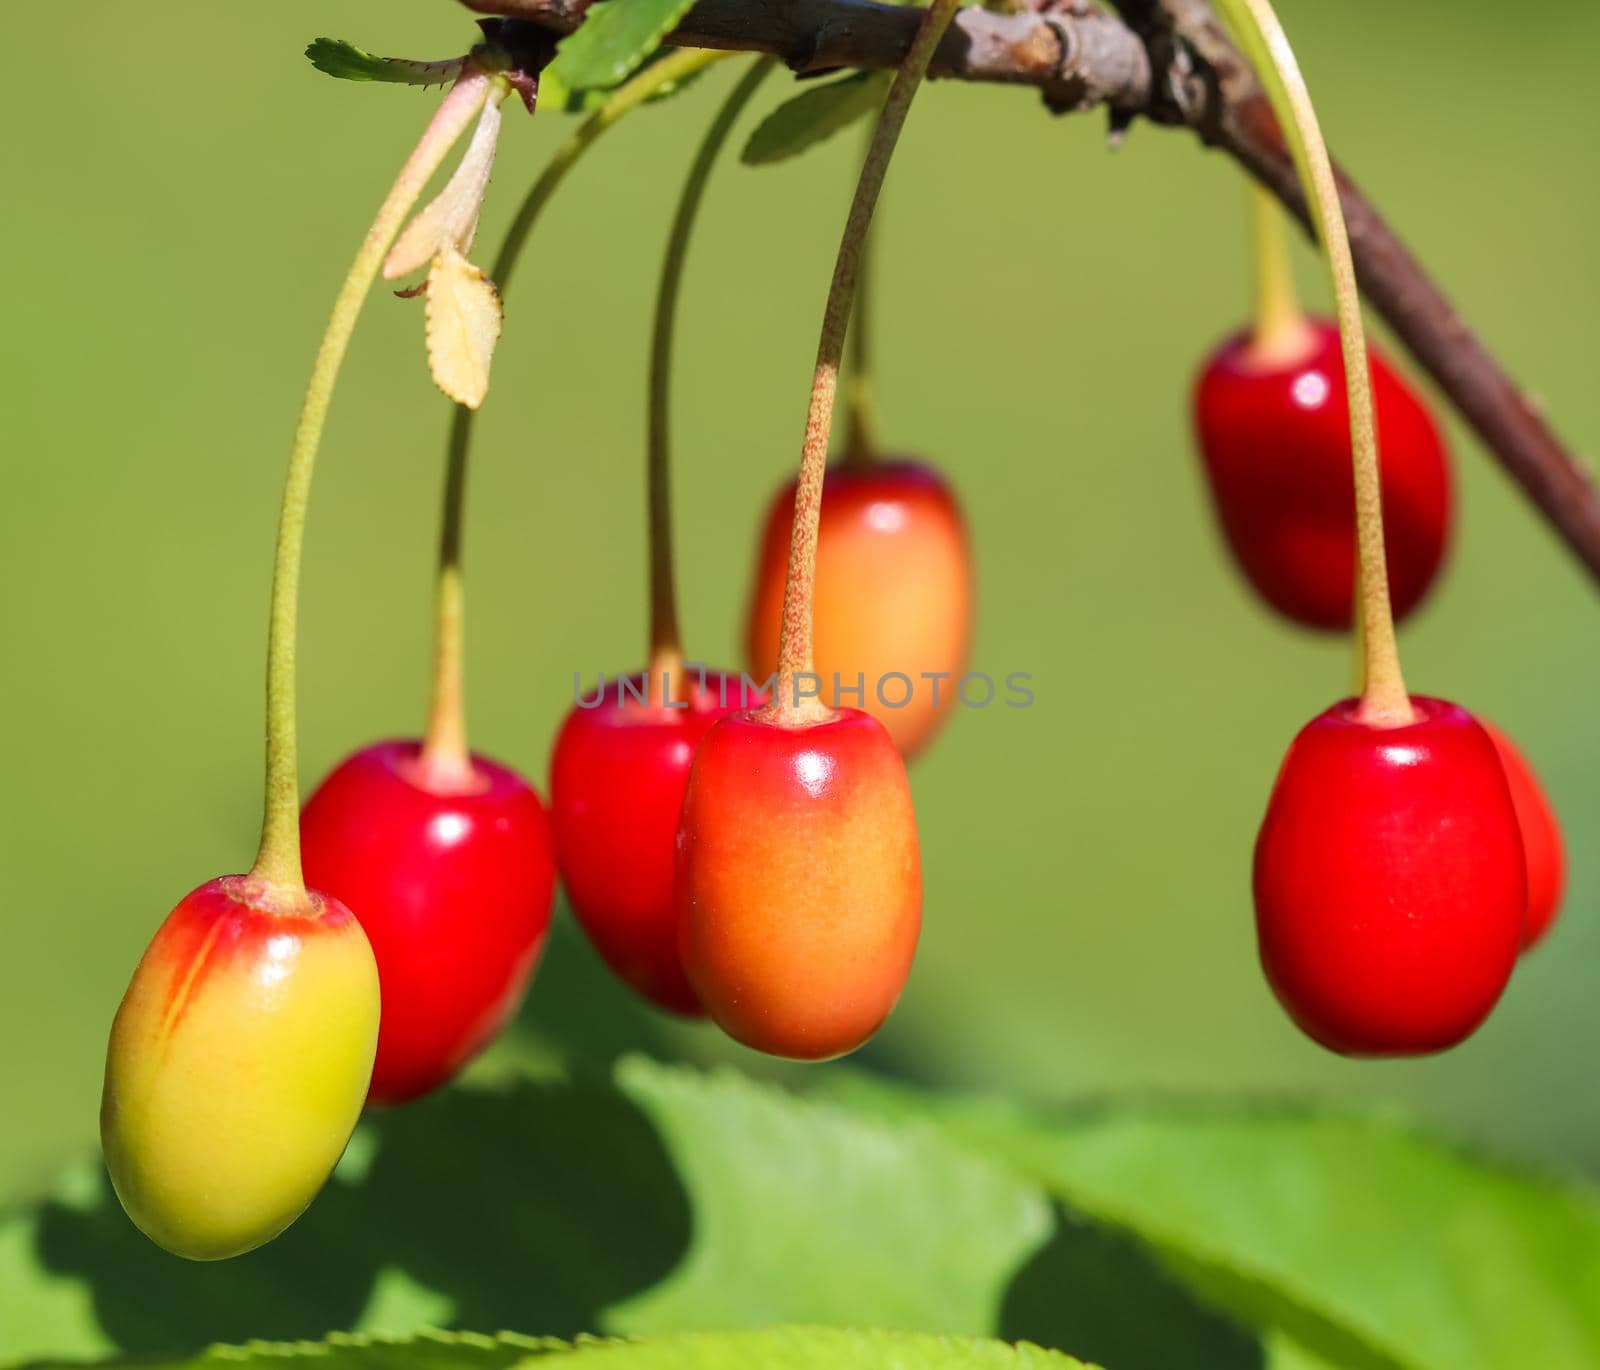 Cherries on a tree branch in the garden on sunny day